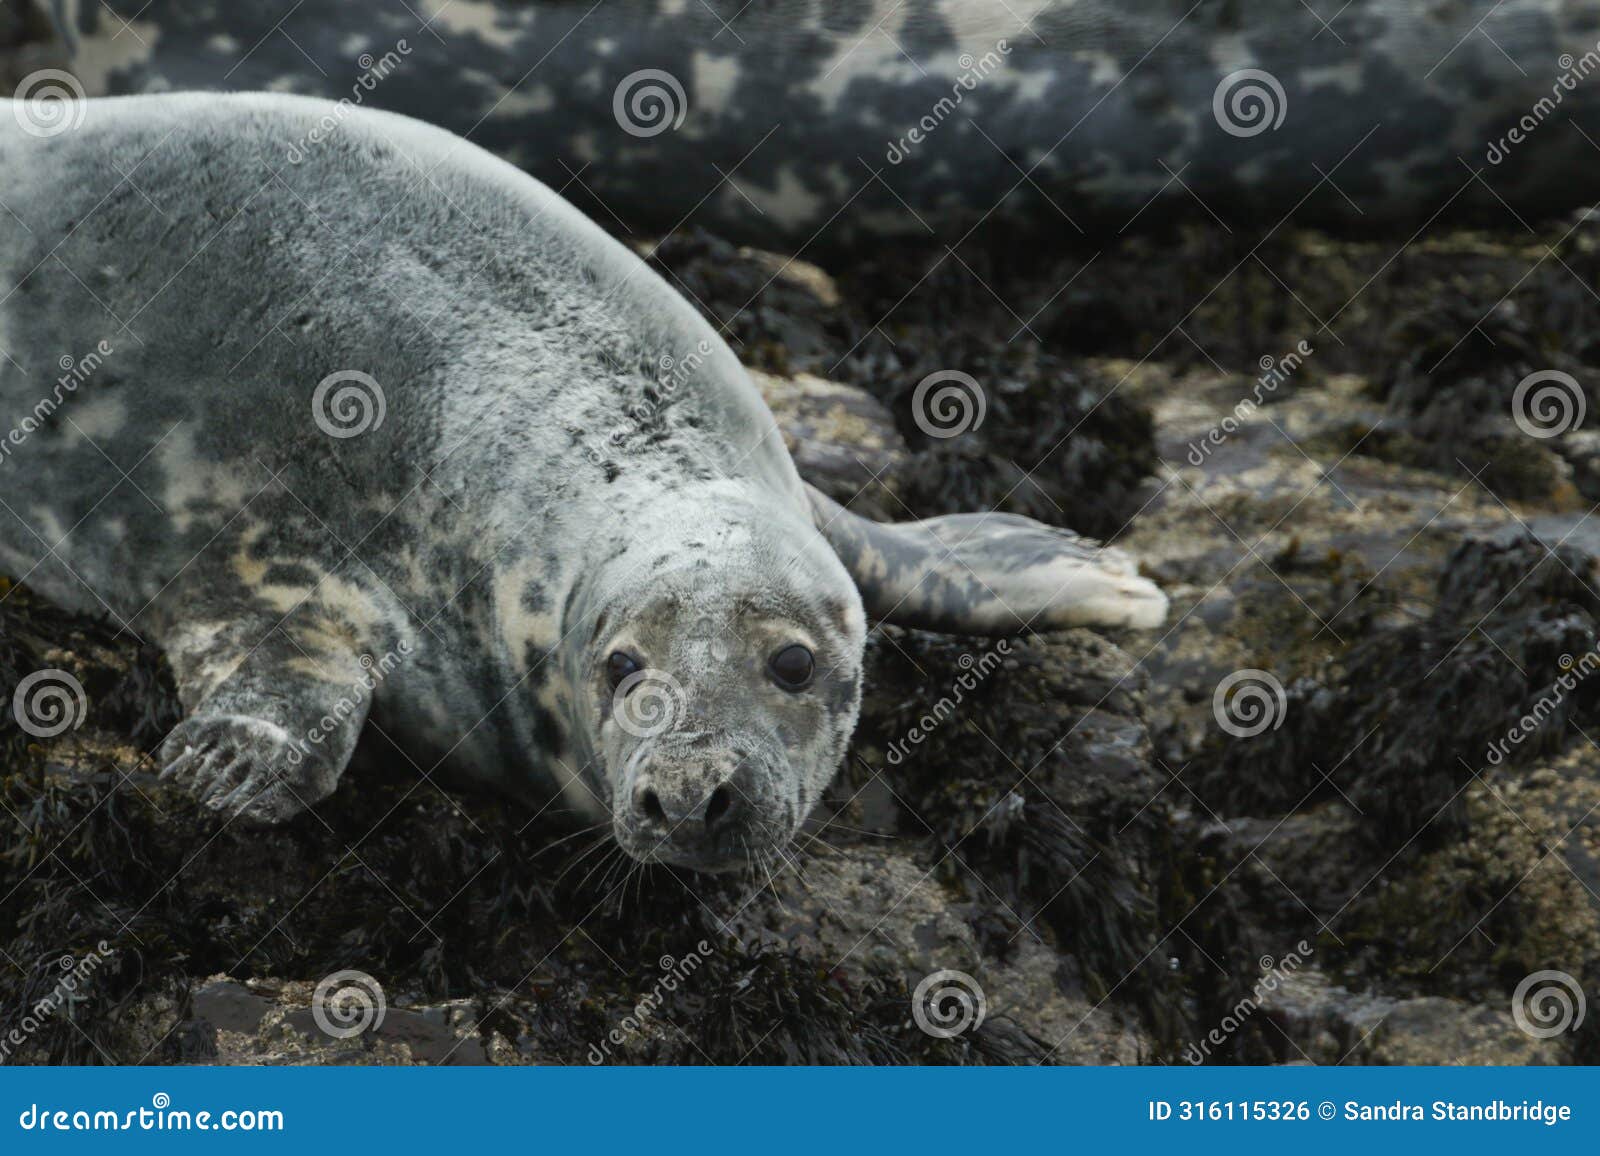 a grey seal, halichoerus grypus, on an island in the sea during a storm.